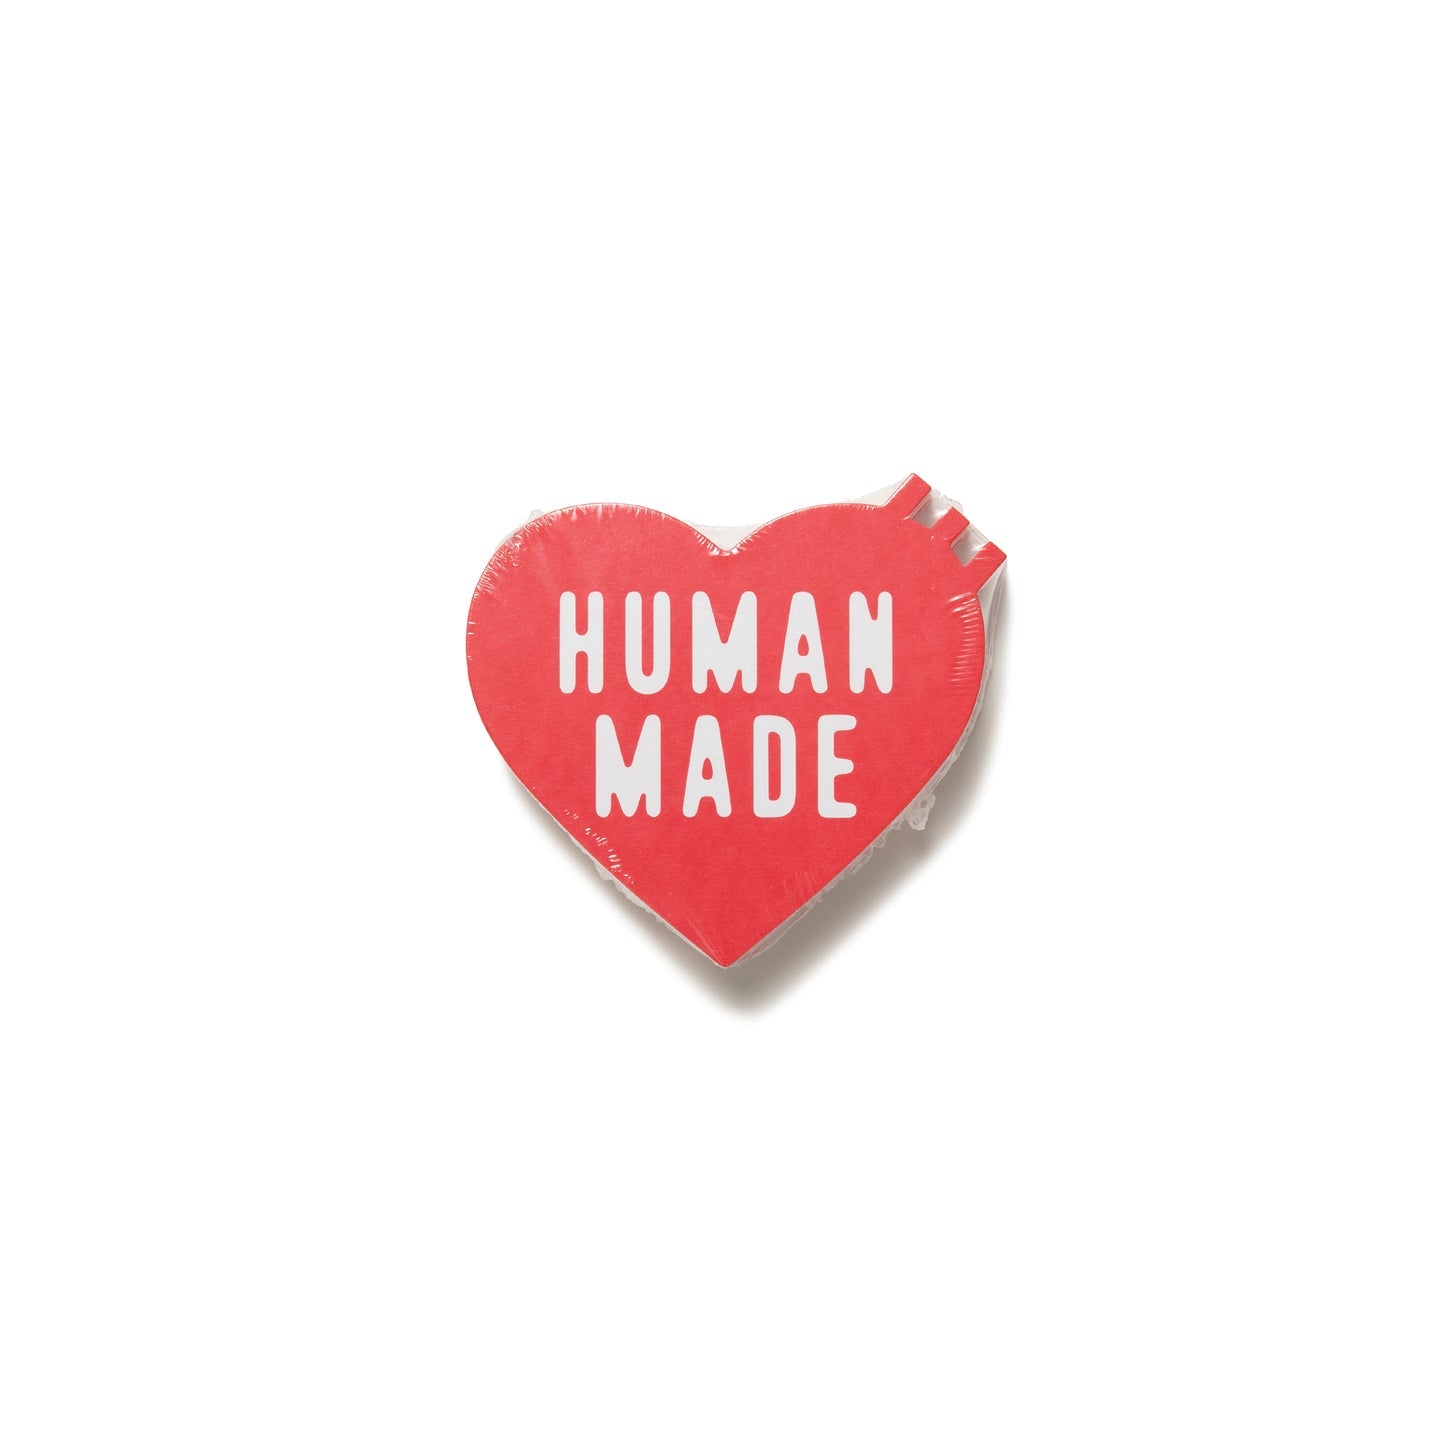 HUMAN MADE – unexpected store